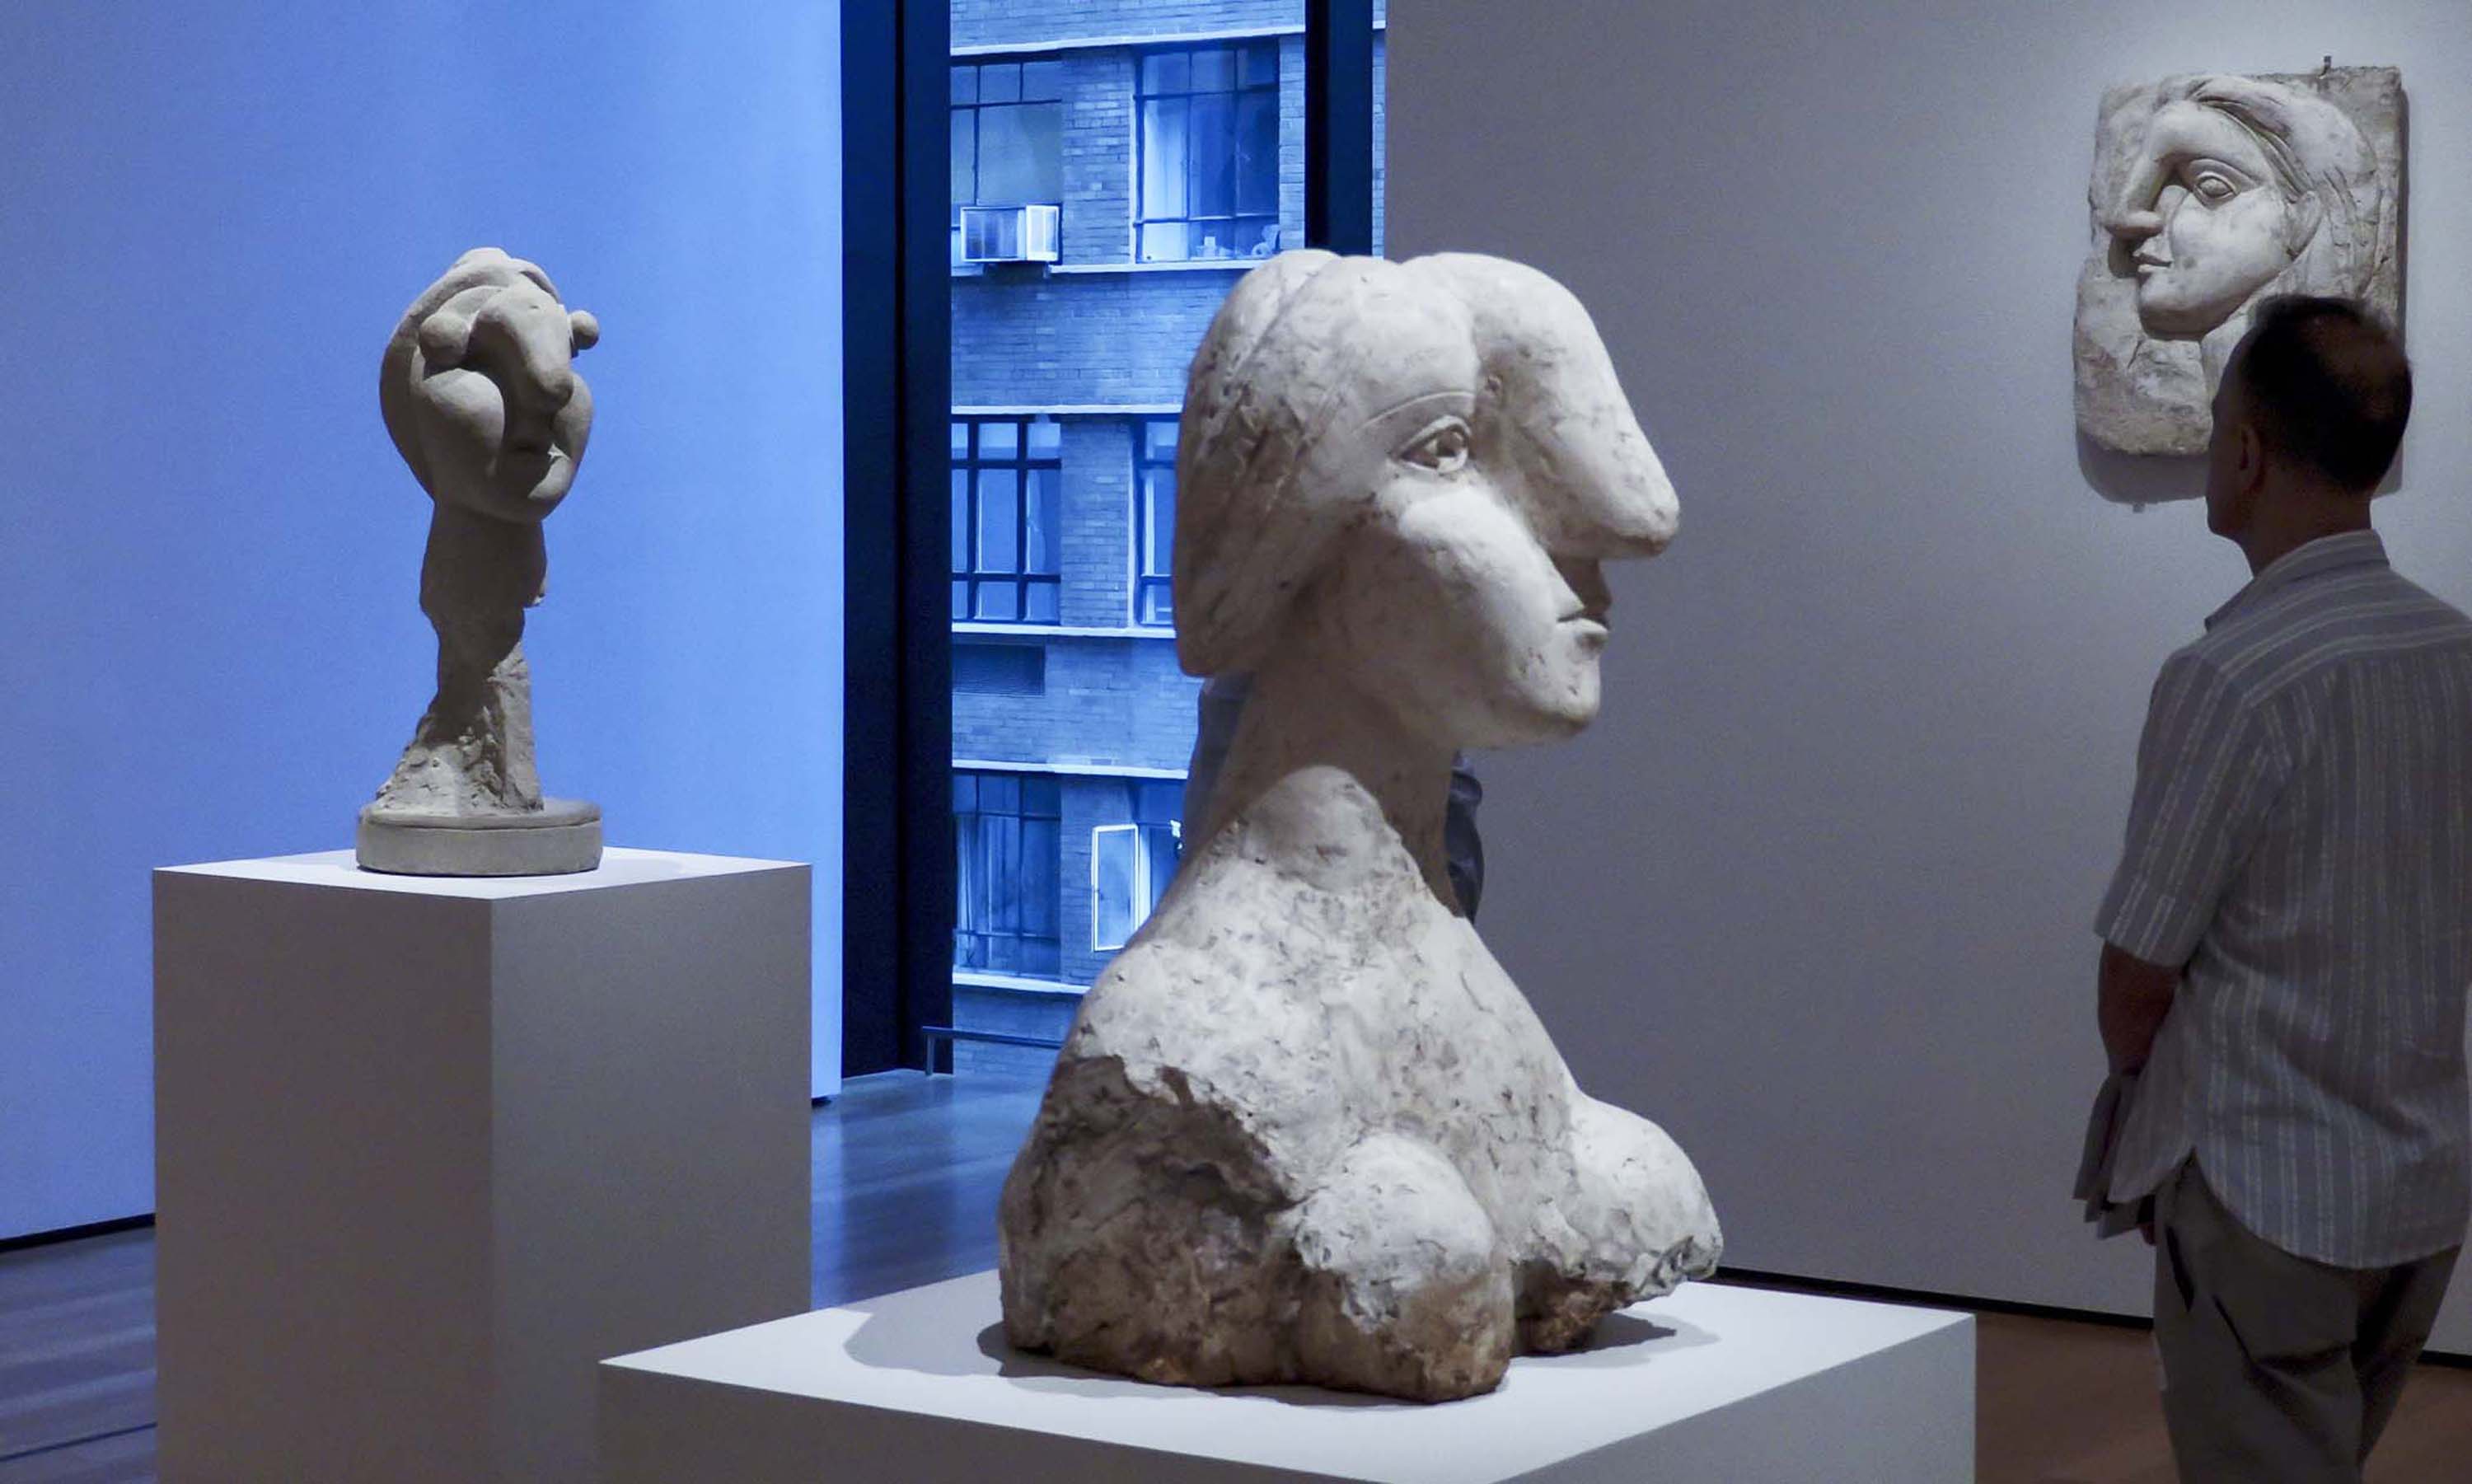 Picasso’s mistress Marie-Thérèse Walter inspired these works in plaster from 1931 (Getty Images)